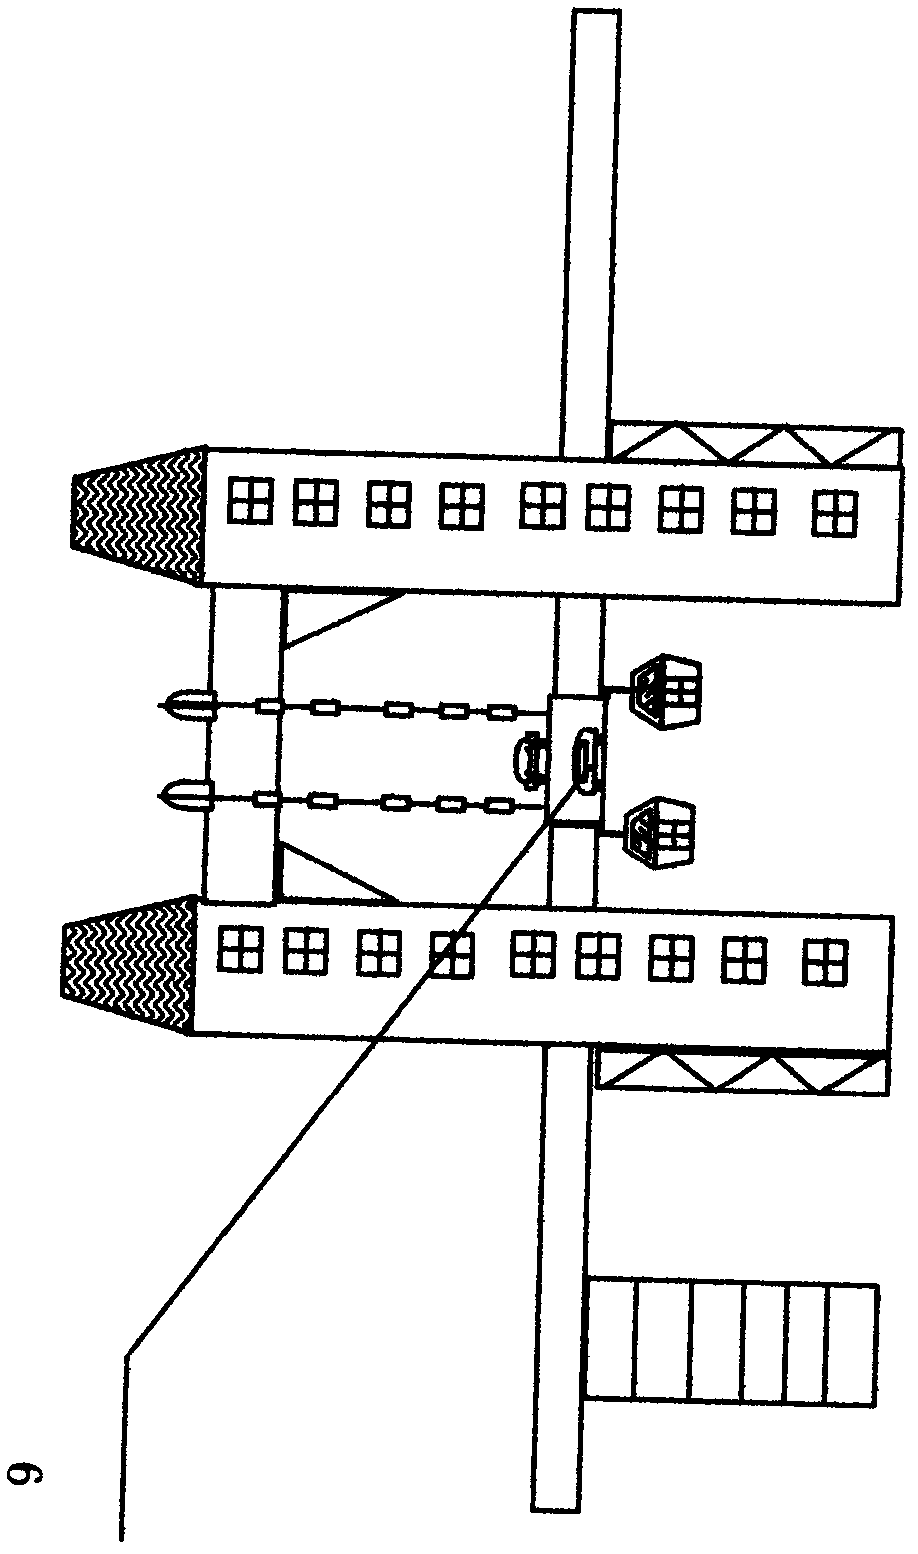 Method for comprehensively constructing urban air highway by high-rise buildings and suspended cable-stayed bridge